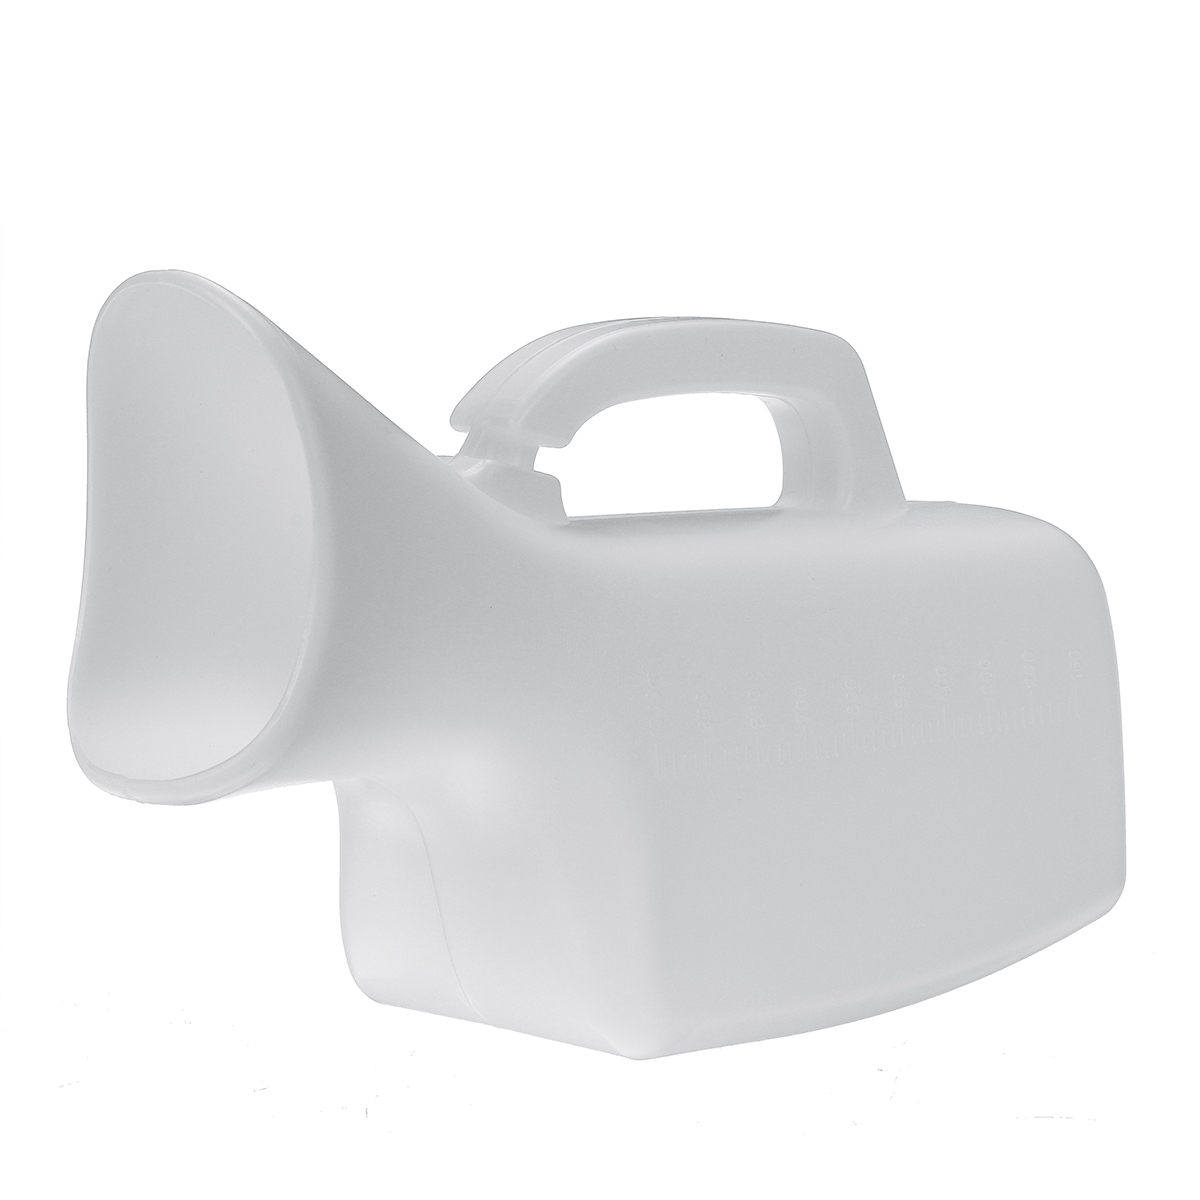 1200ML-Portable-Urinal-Handheld-Urinal-Thickened-Plastic-Urinal-Outdoor-Medical-Men-And-Women-Availa-1857146-17